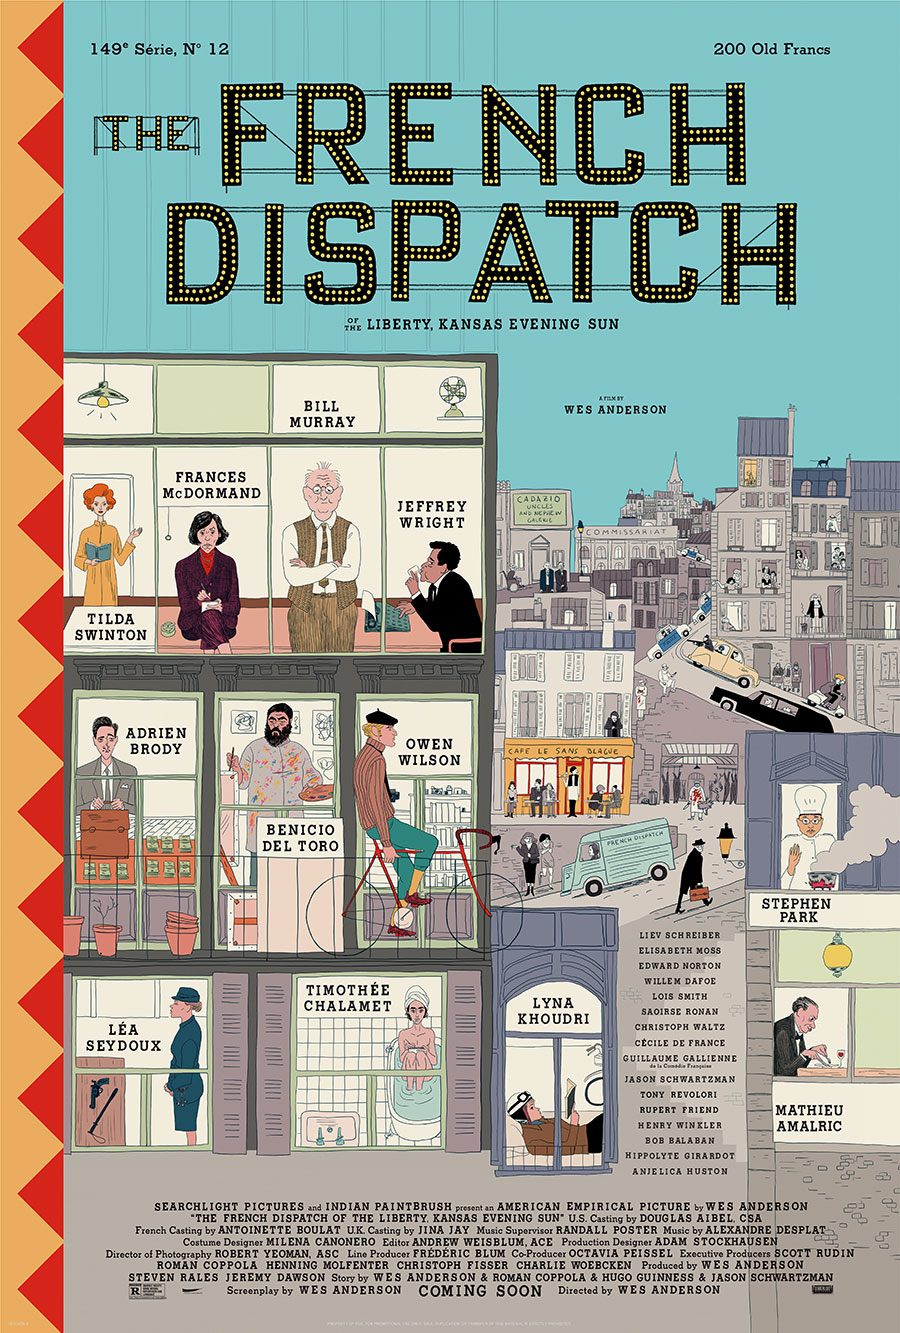 The French Dispatch Wes Anderson movie poster